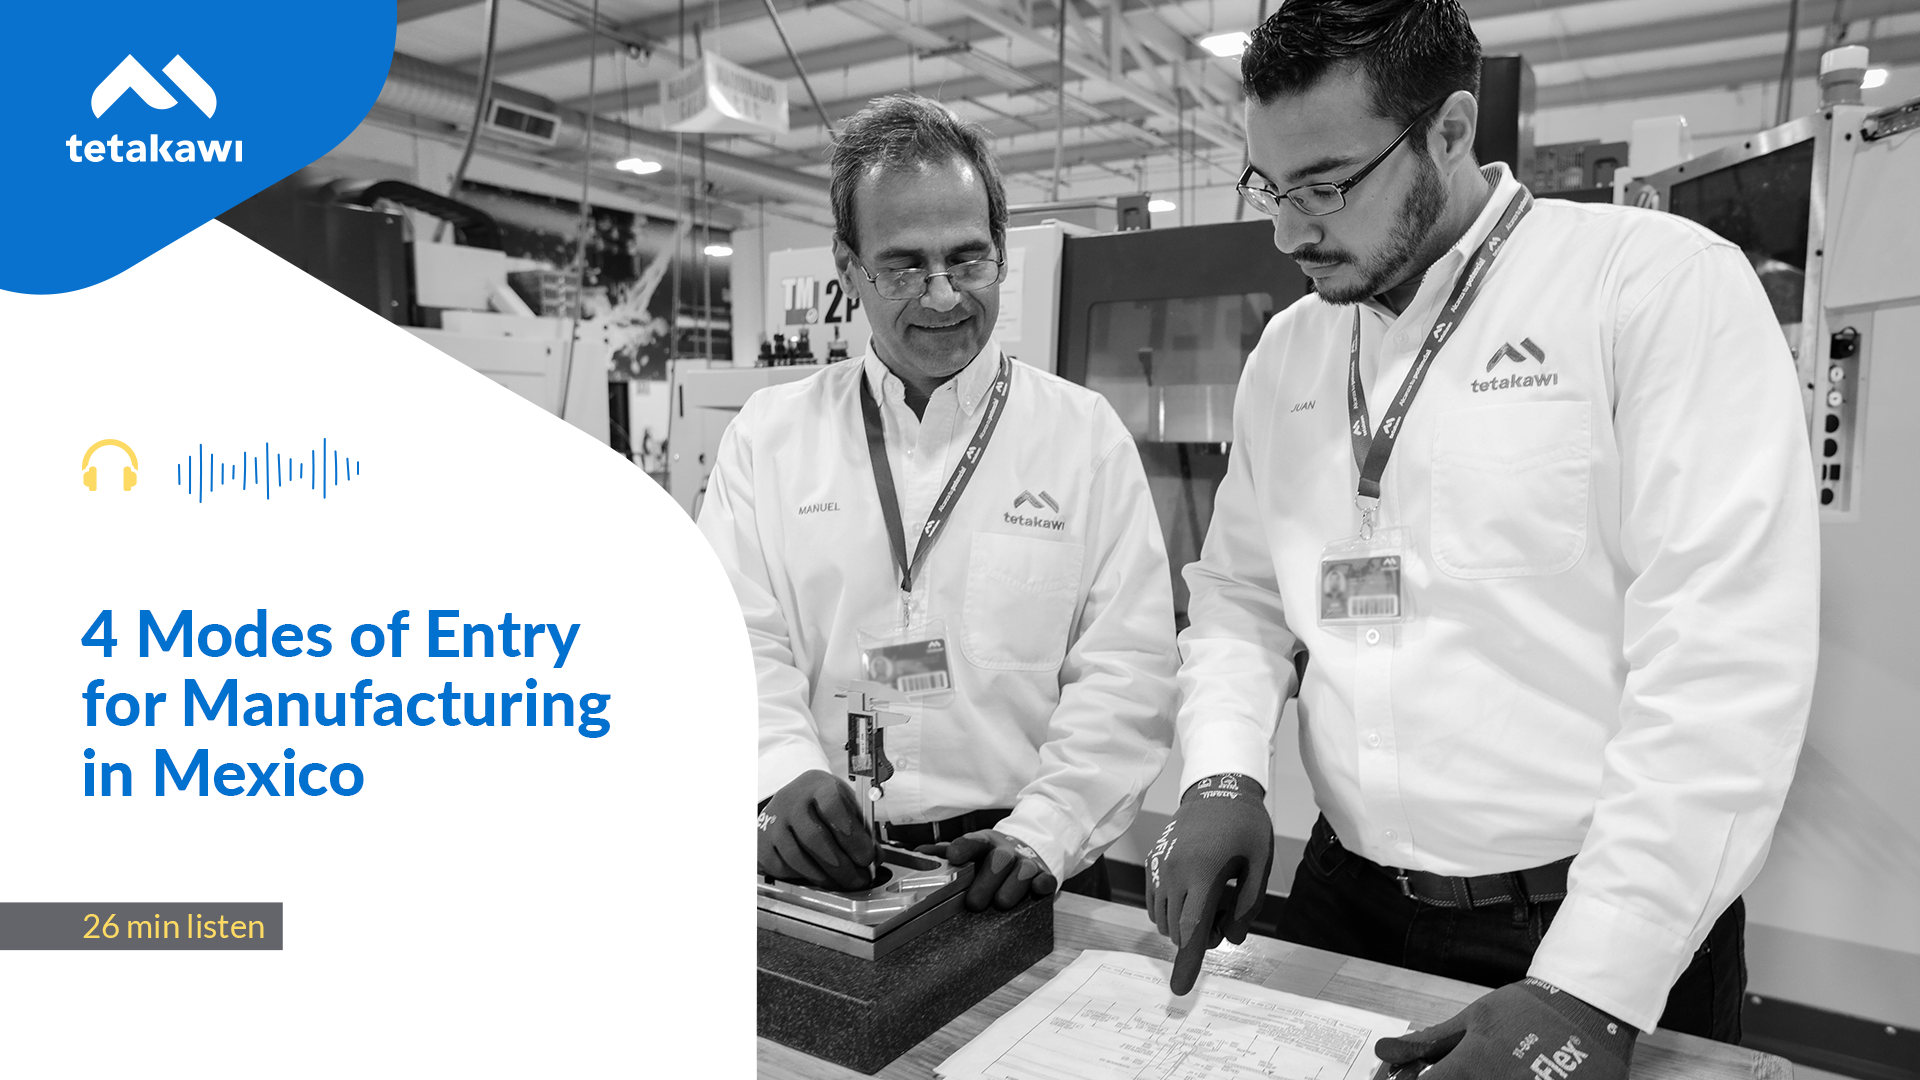 Episode 2: 4 Modes of Entry for Manufacturing in Mexico